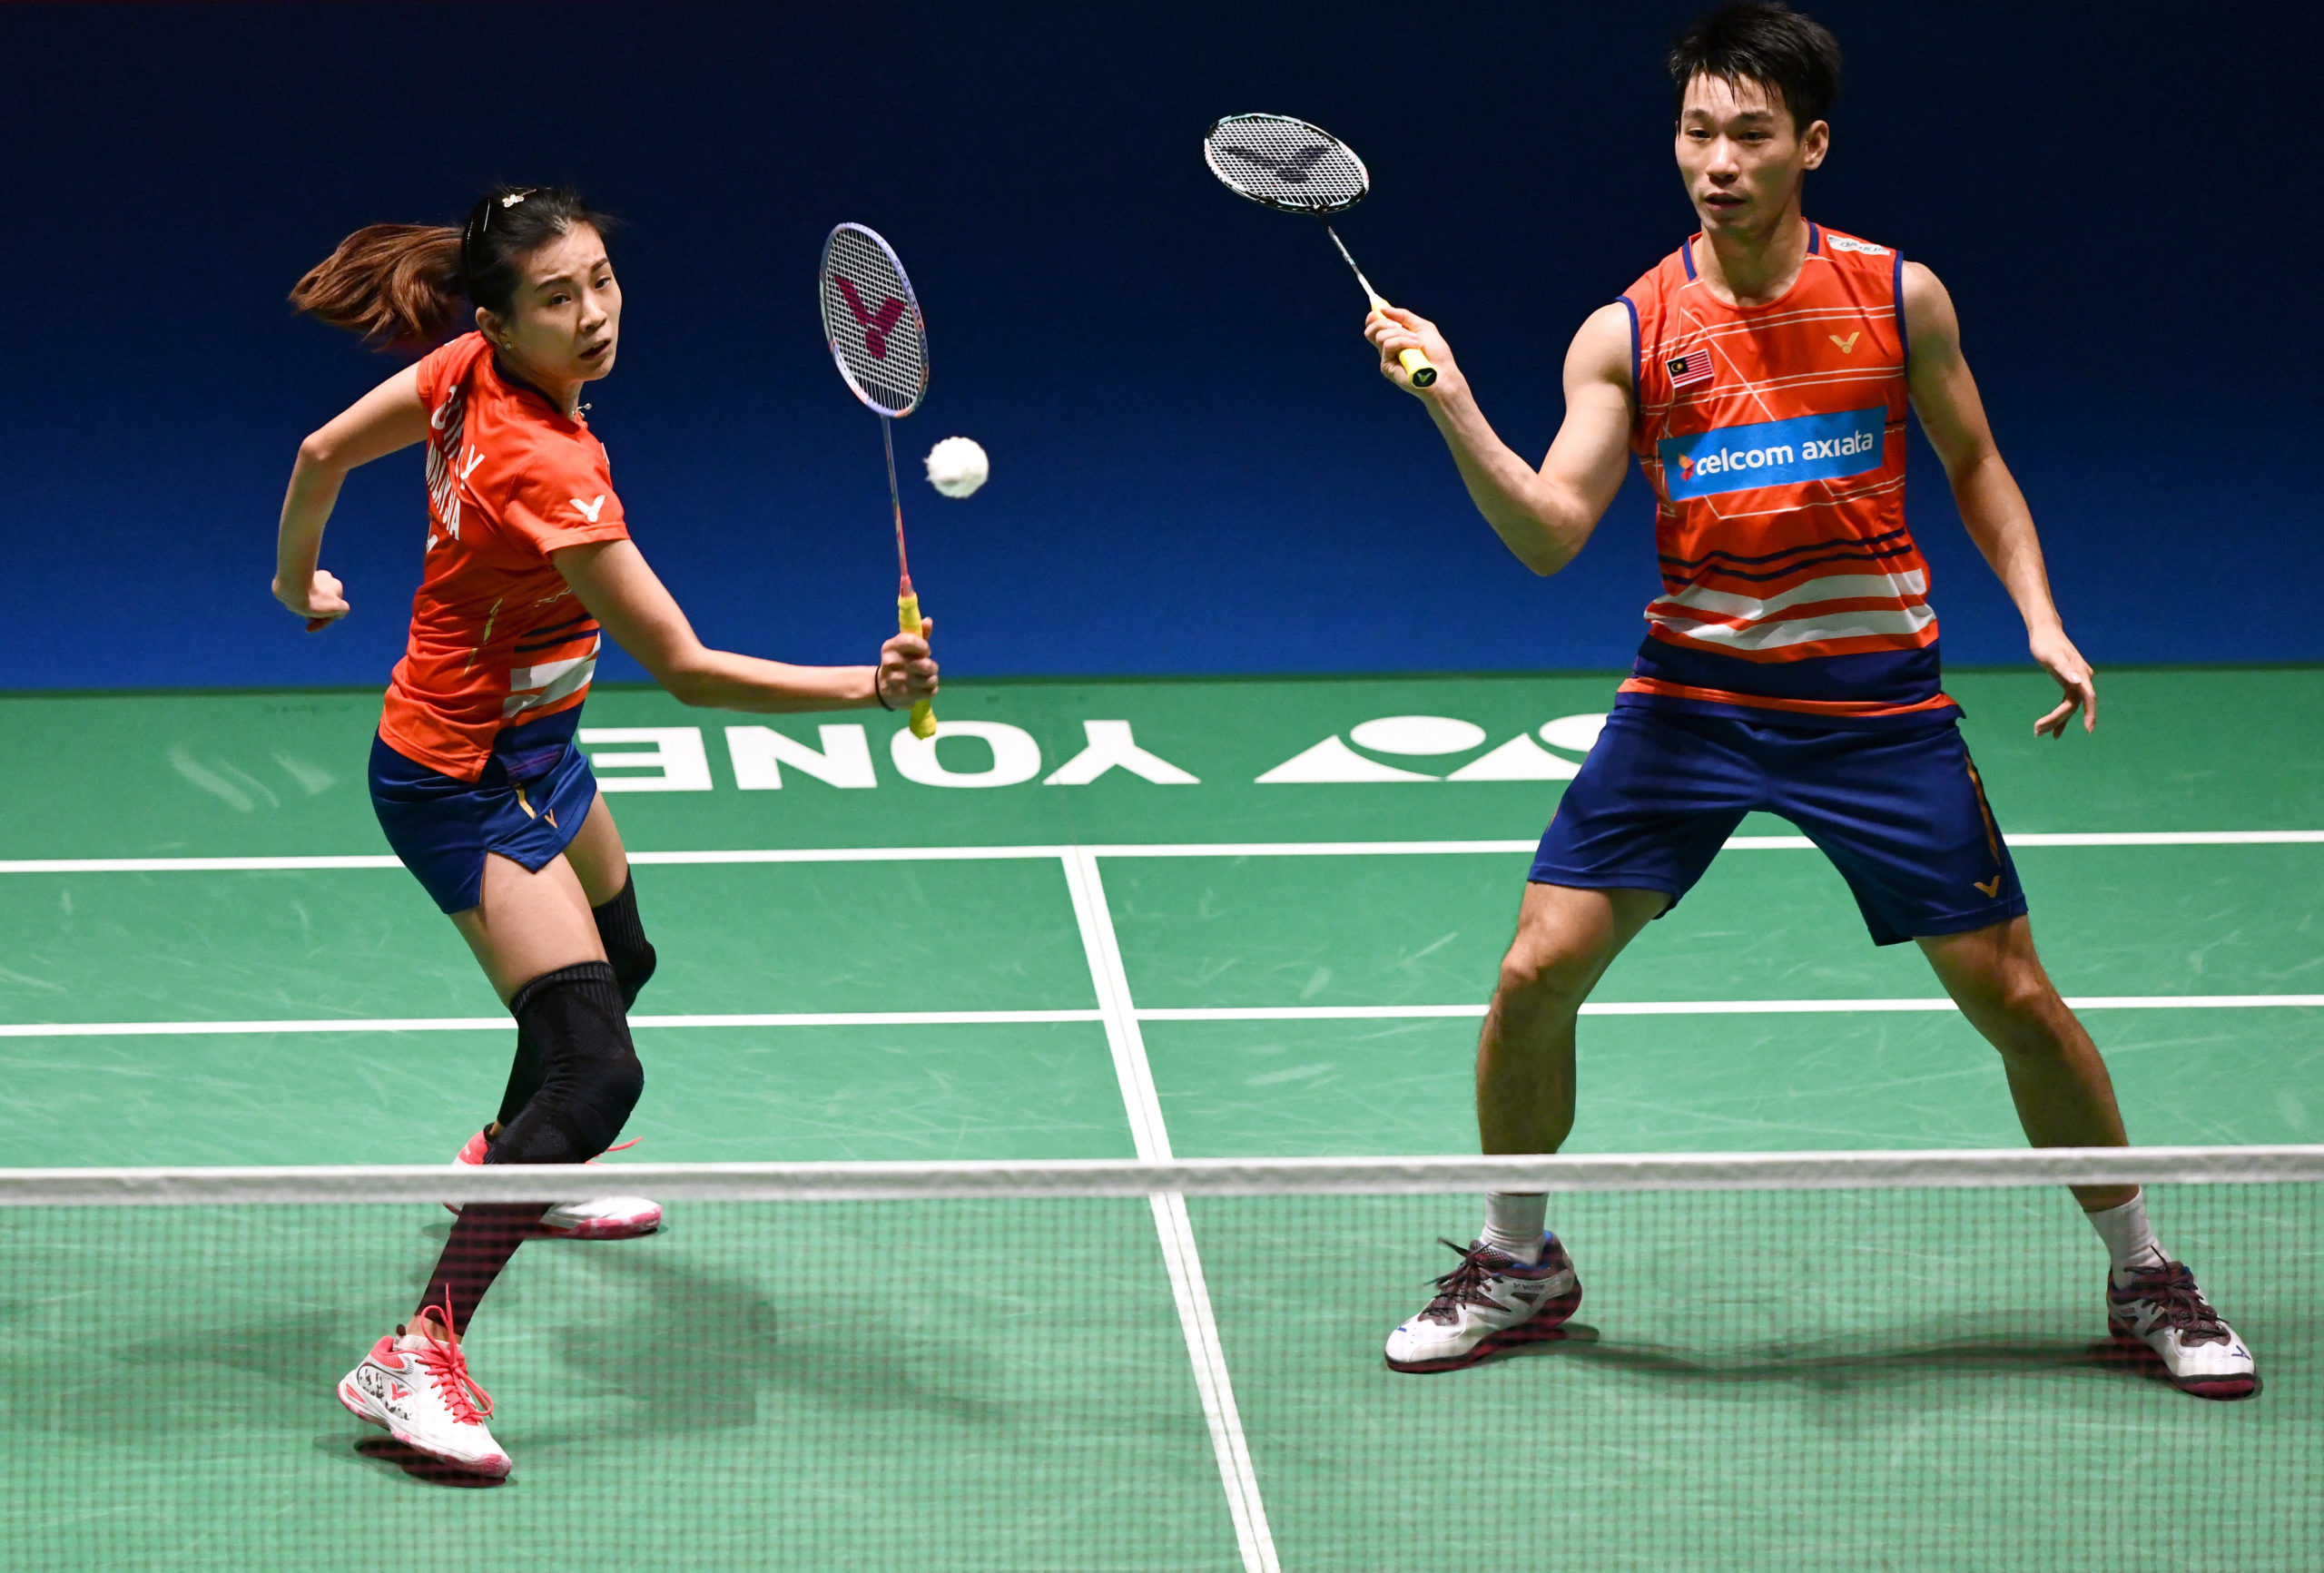 The latest update on Malaysian badminton players at 2021 Denmark Open